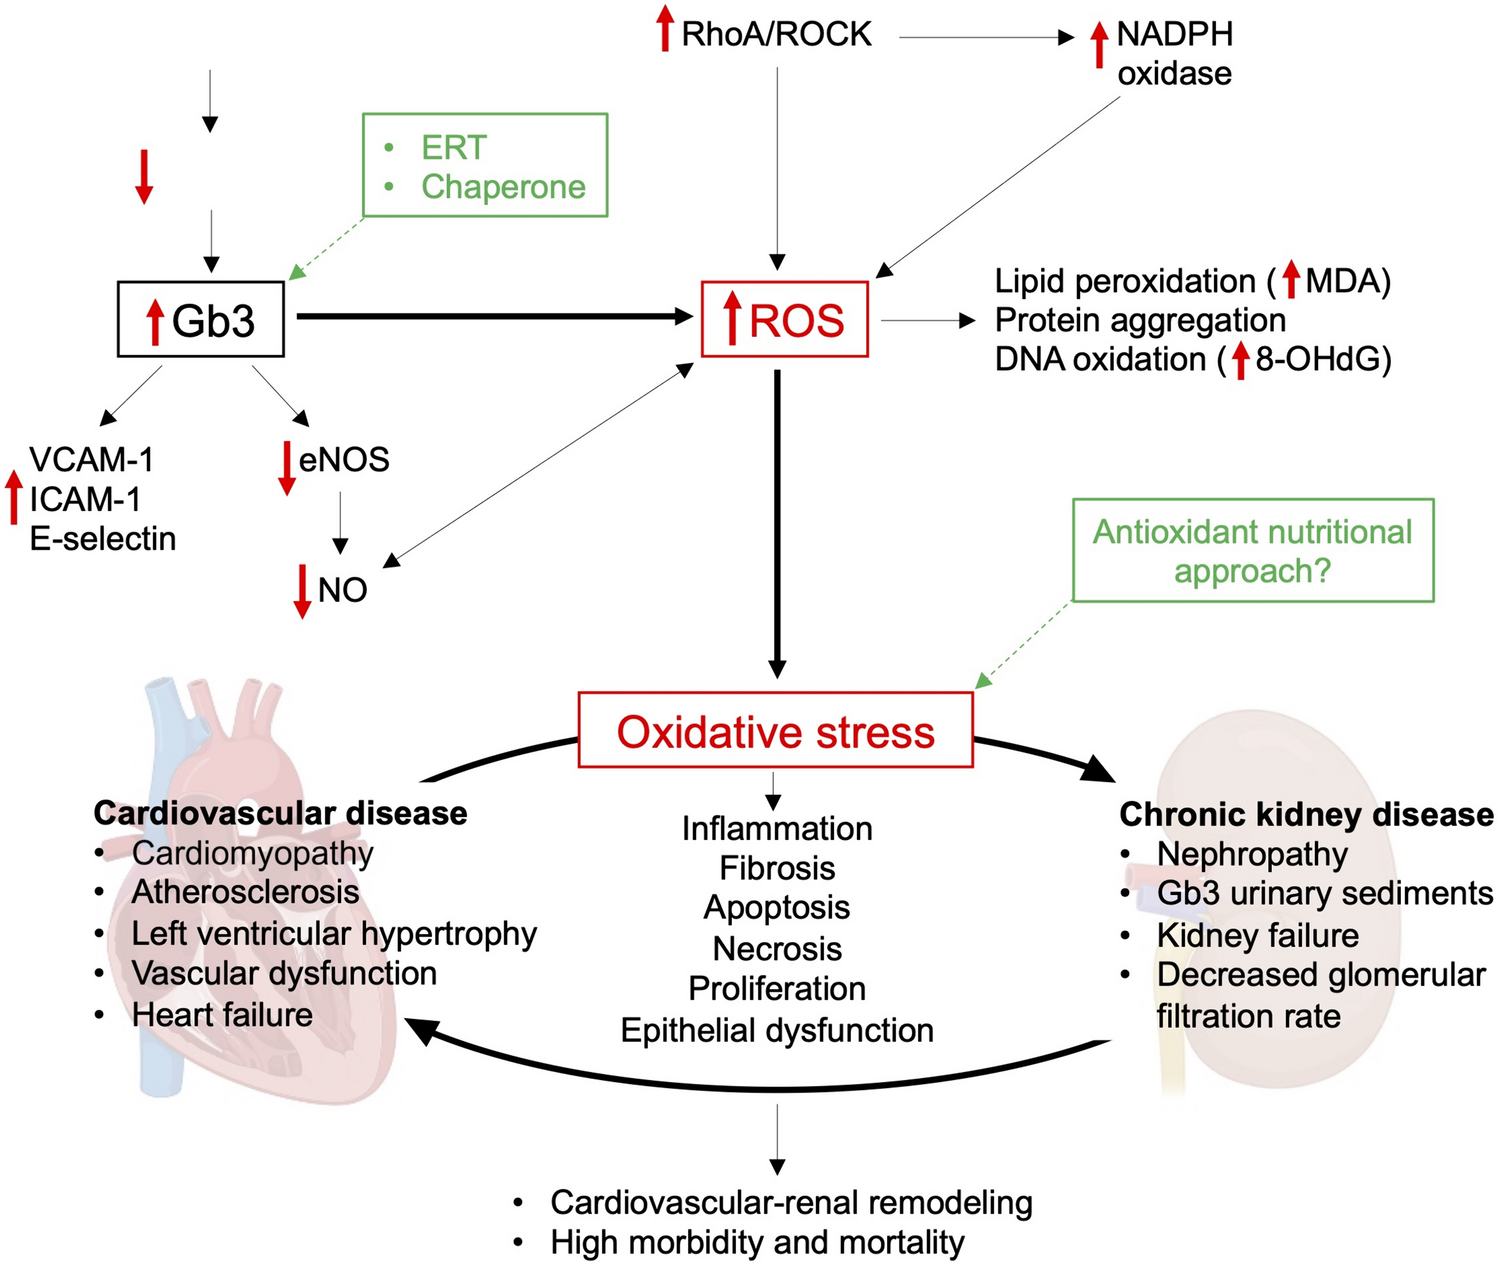 Oxidative stress and its role in Fabry disease